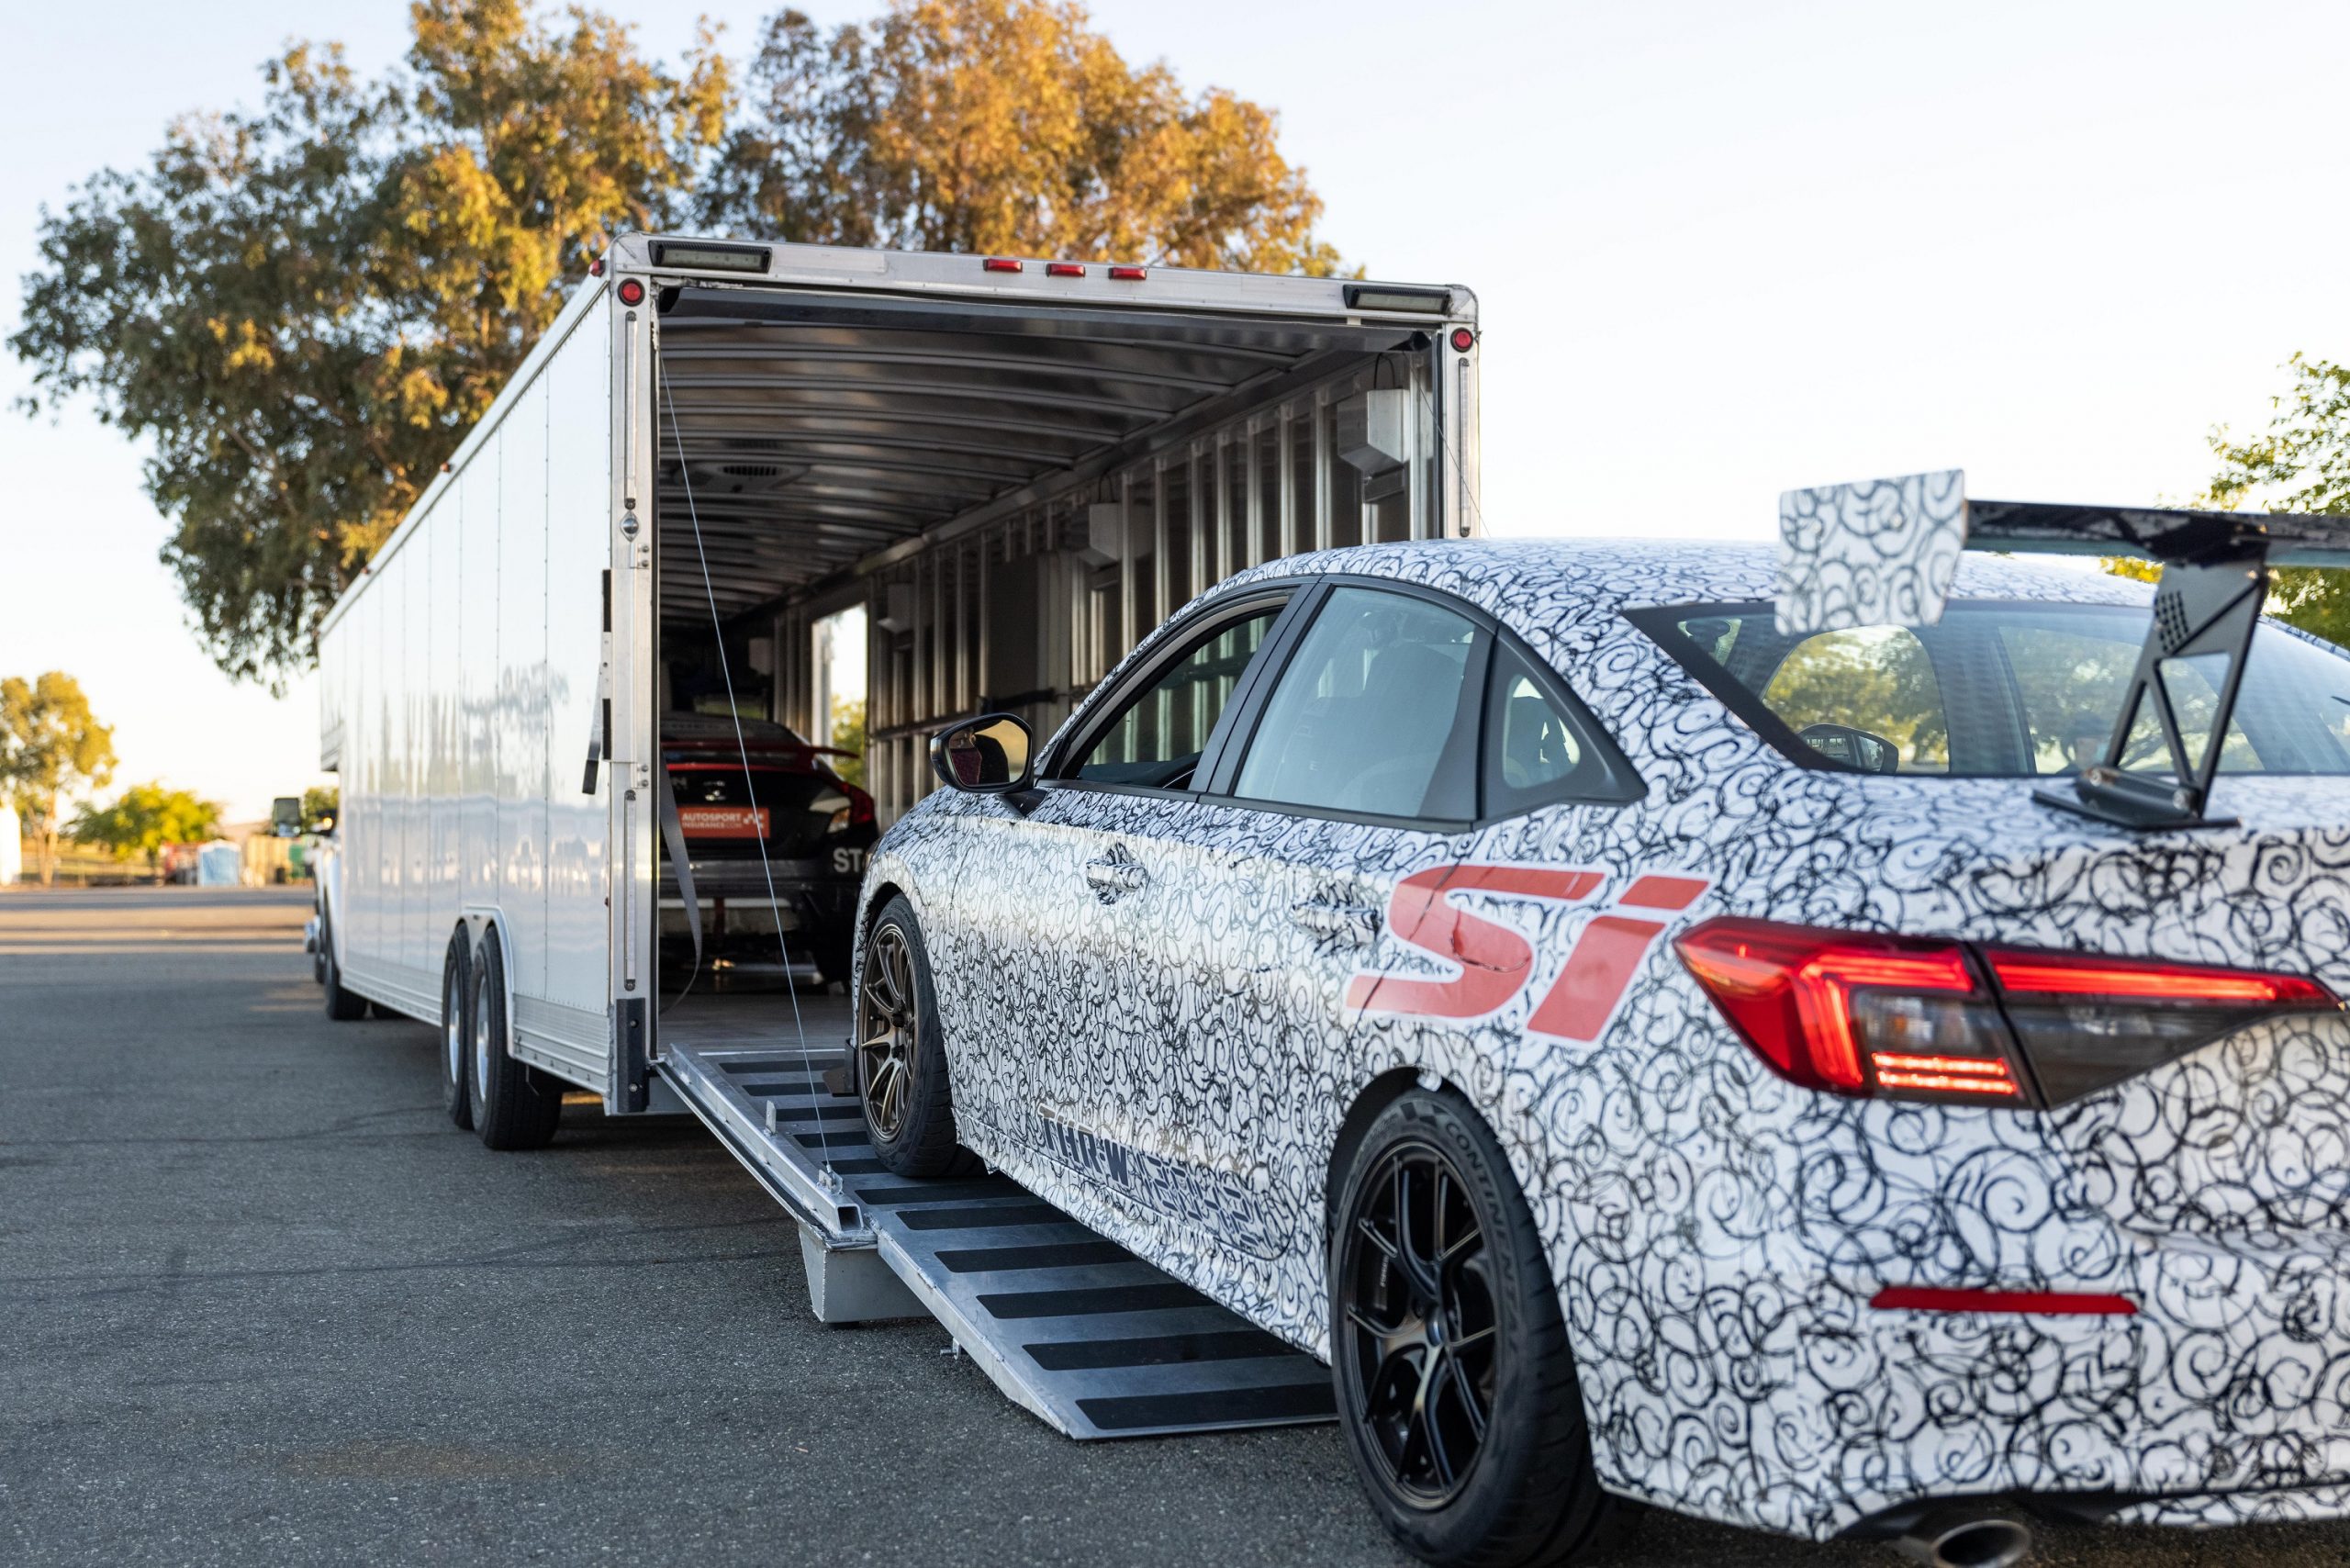 The race-spec Civic Si being loaded into a trailer, shot from the rear 3/4.